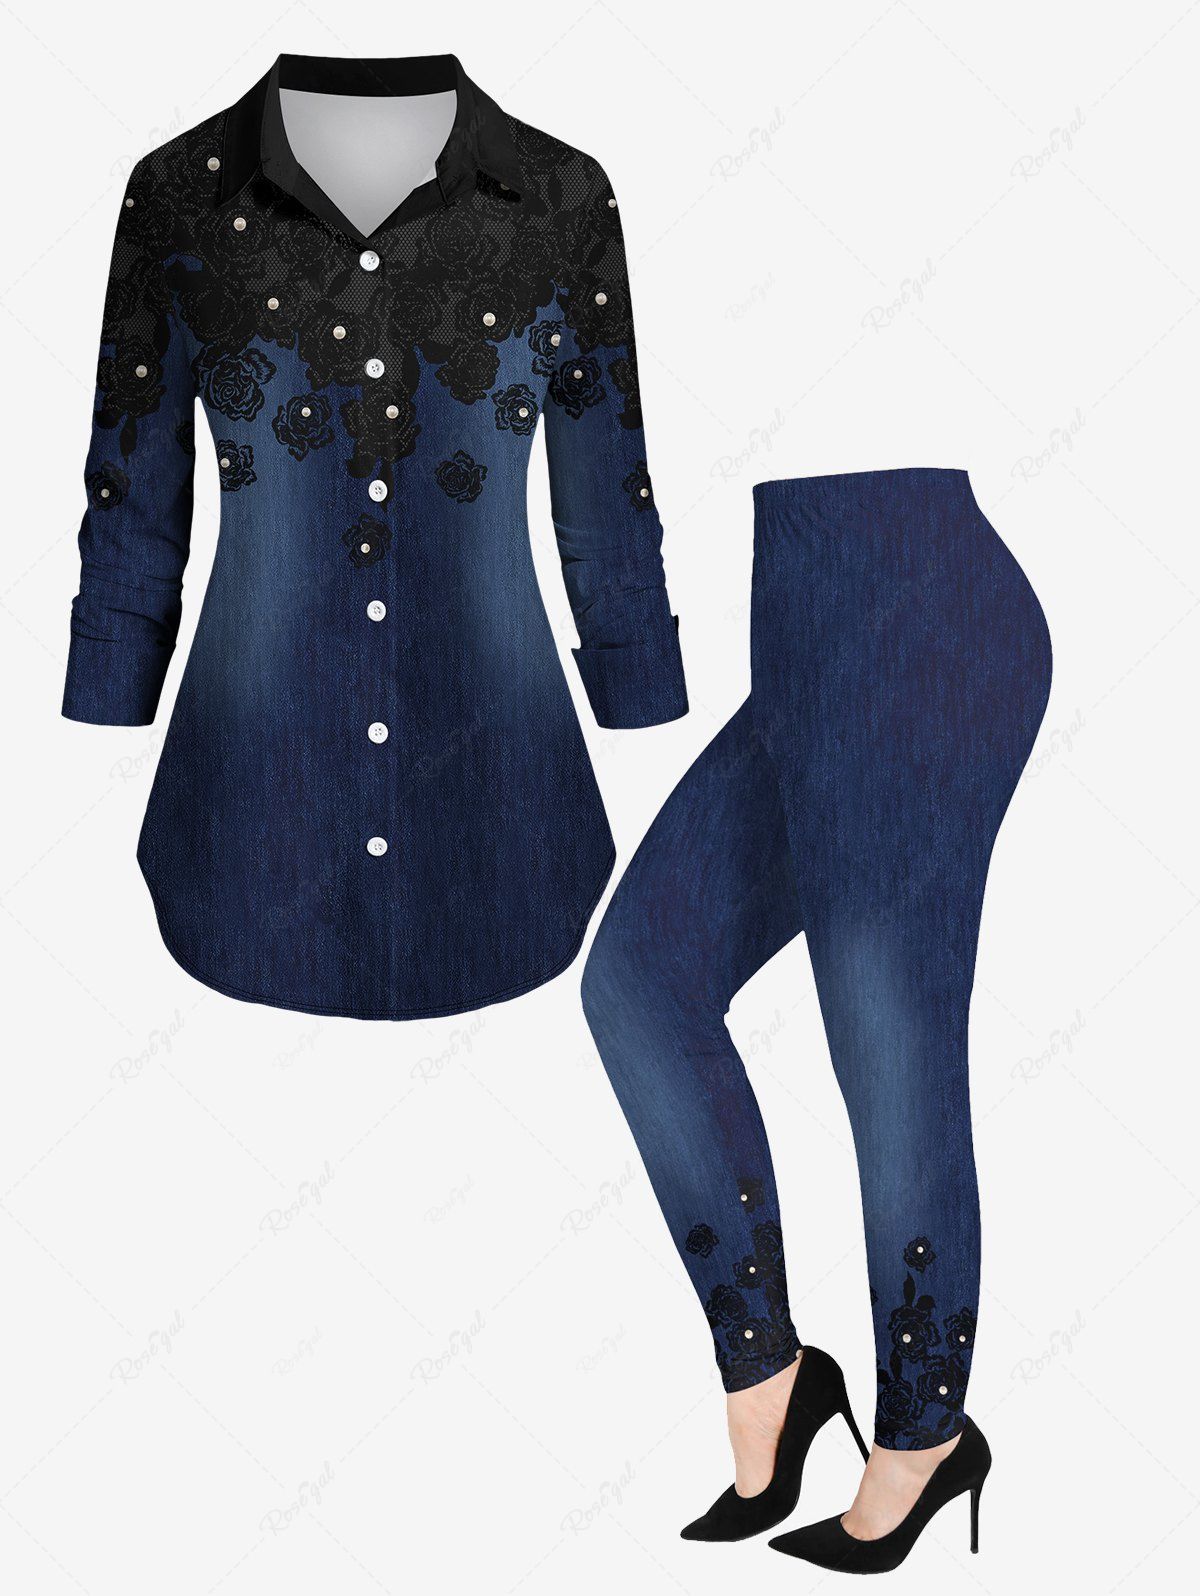 New Floral Appliques Crystal Denim 3D Printed Button Down Shirt and Leggings Plus Size Matching Set  